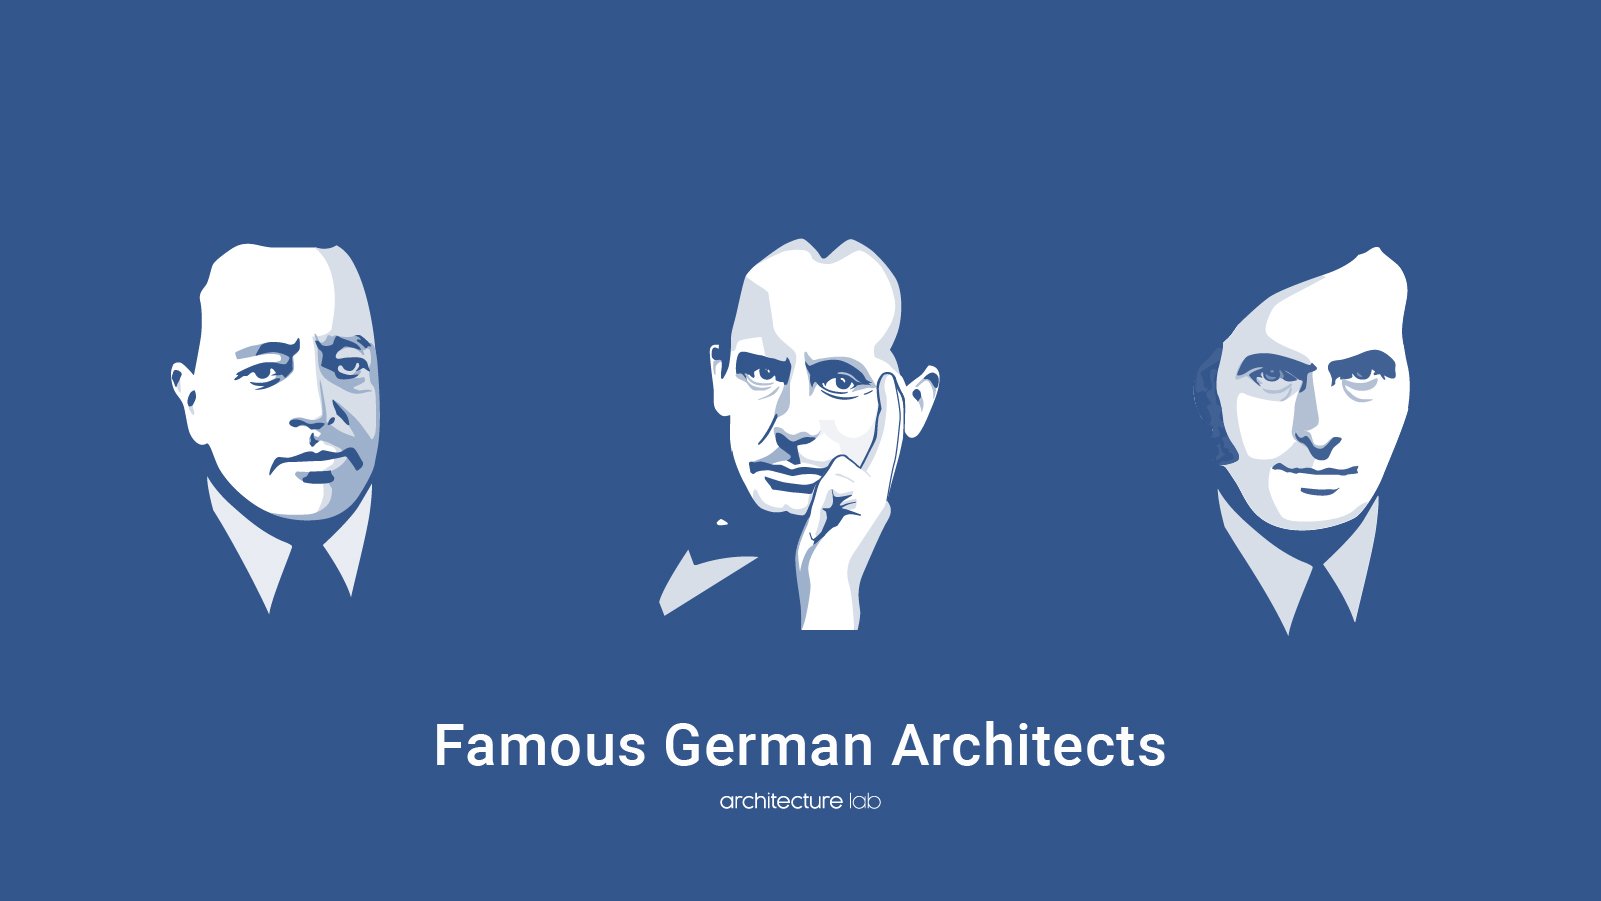 17 famous german architects and their proud works